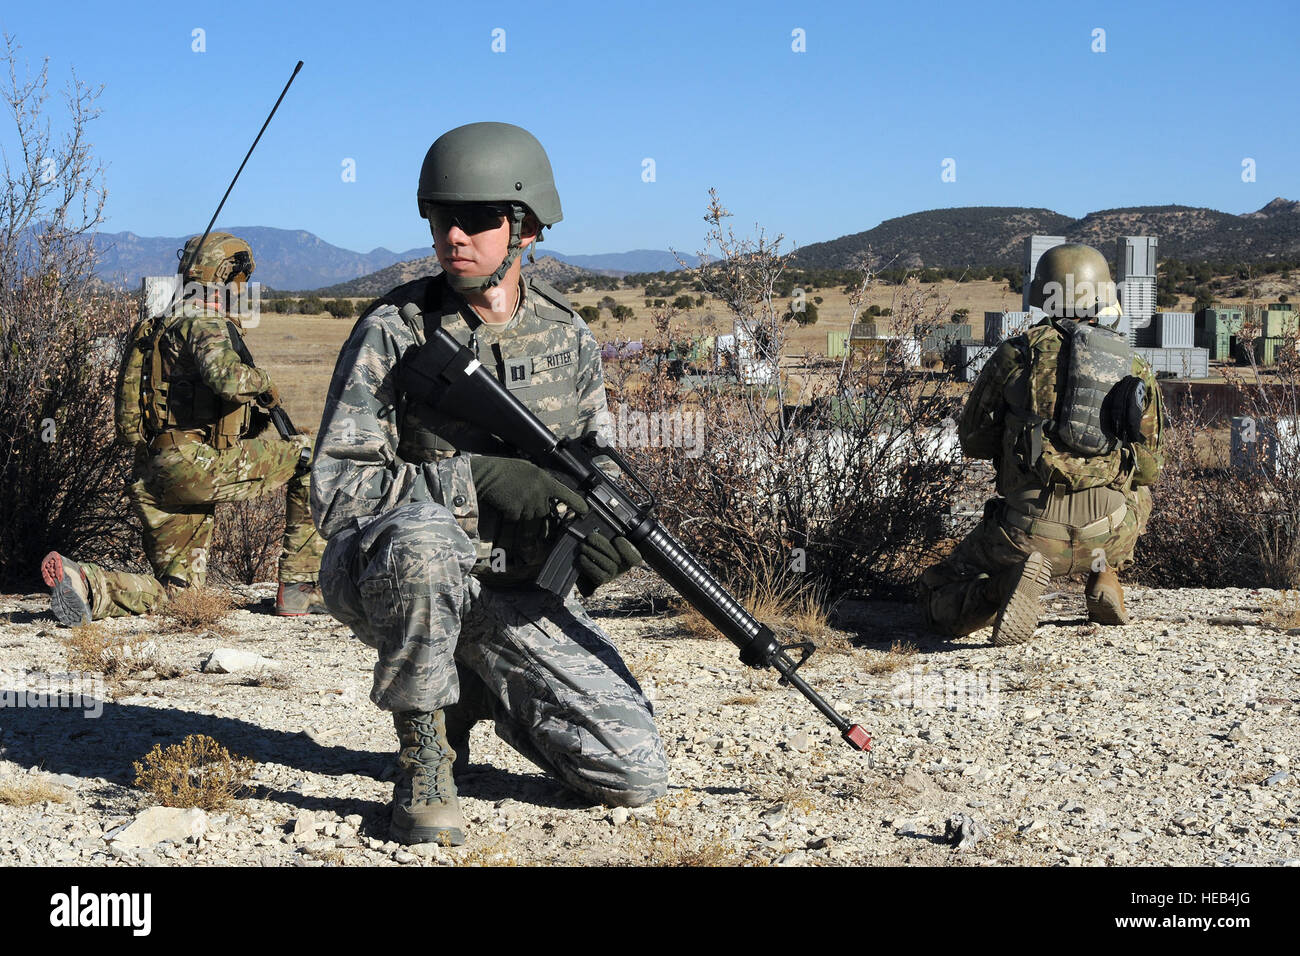 SCHRIEVER AIR FORCE BASE, Colo. -- Captain Zachary Ritter, 3rd Space Operations Squadron, secures his perimeter during a joint exercise with the 13th Air Support Operations Squadron and 4th Infantry Division at a Fort Carson Colorado training range Wednesday, 9 November 2016.  The purpose of the exercise was for all participants to gain a better understanding of the products utilized that the 50th Space Wing provides.  Dennis Rogers) Stock Photo